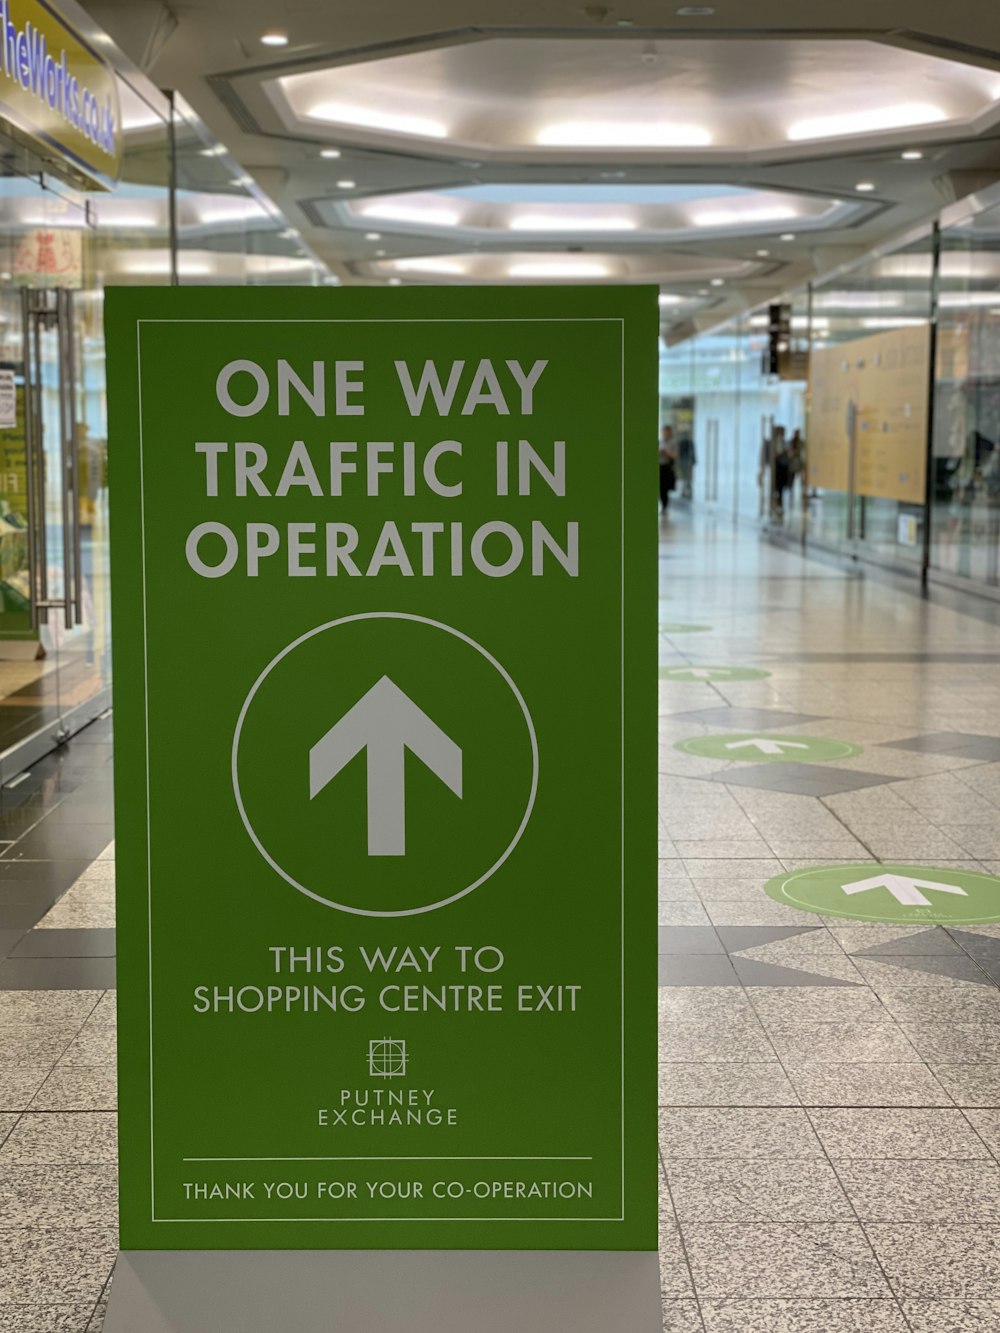 a one way traffic in operation sign in a mall